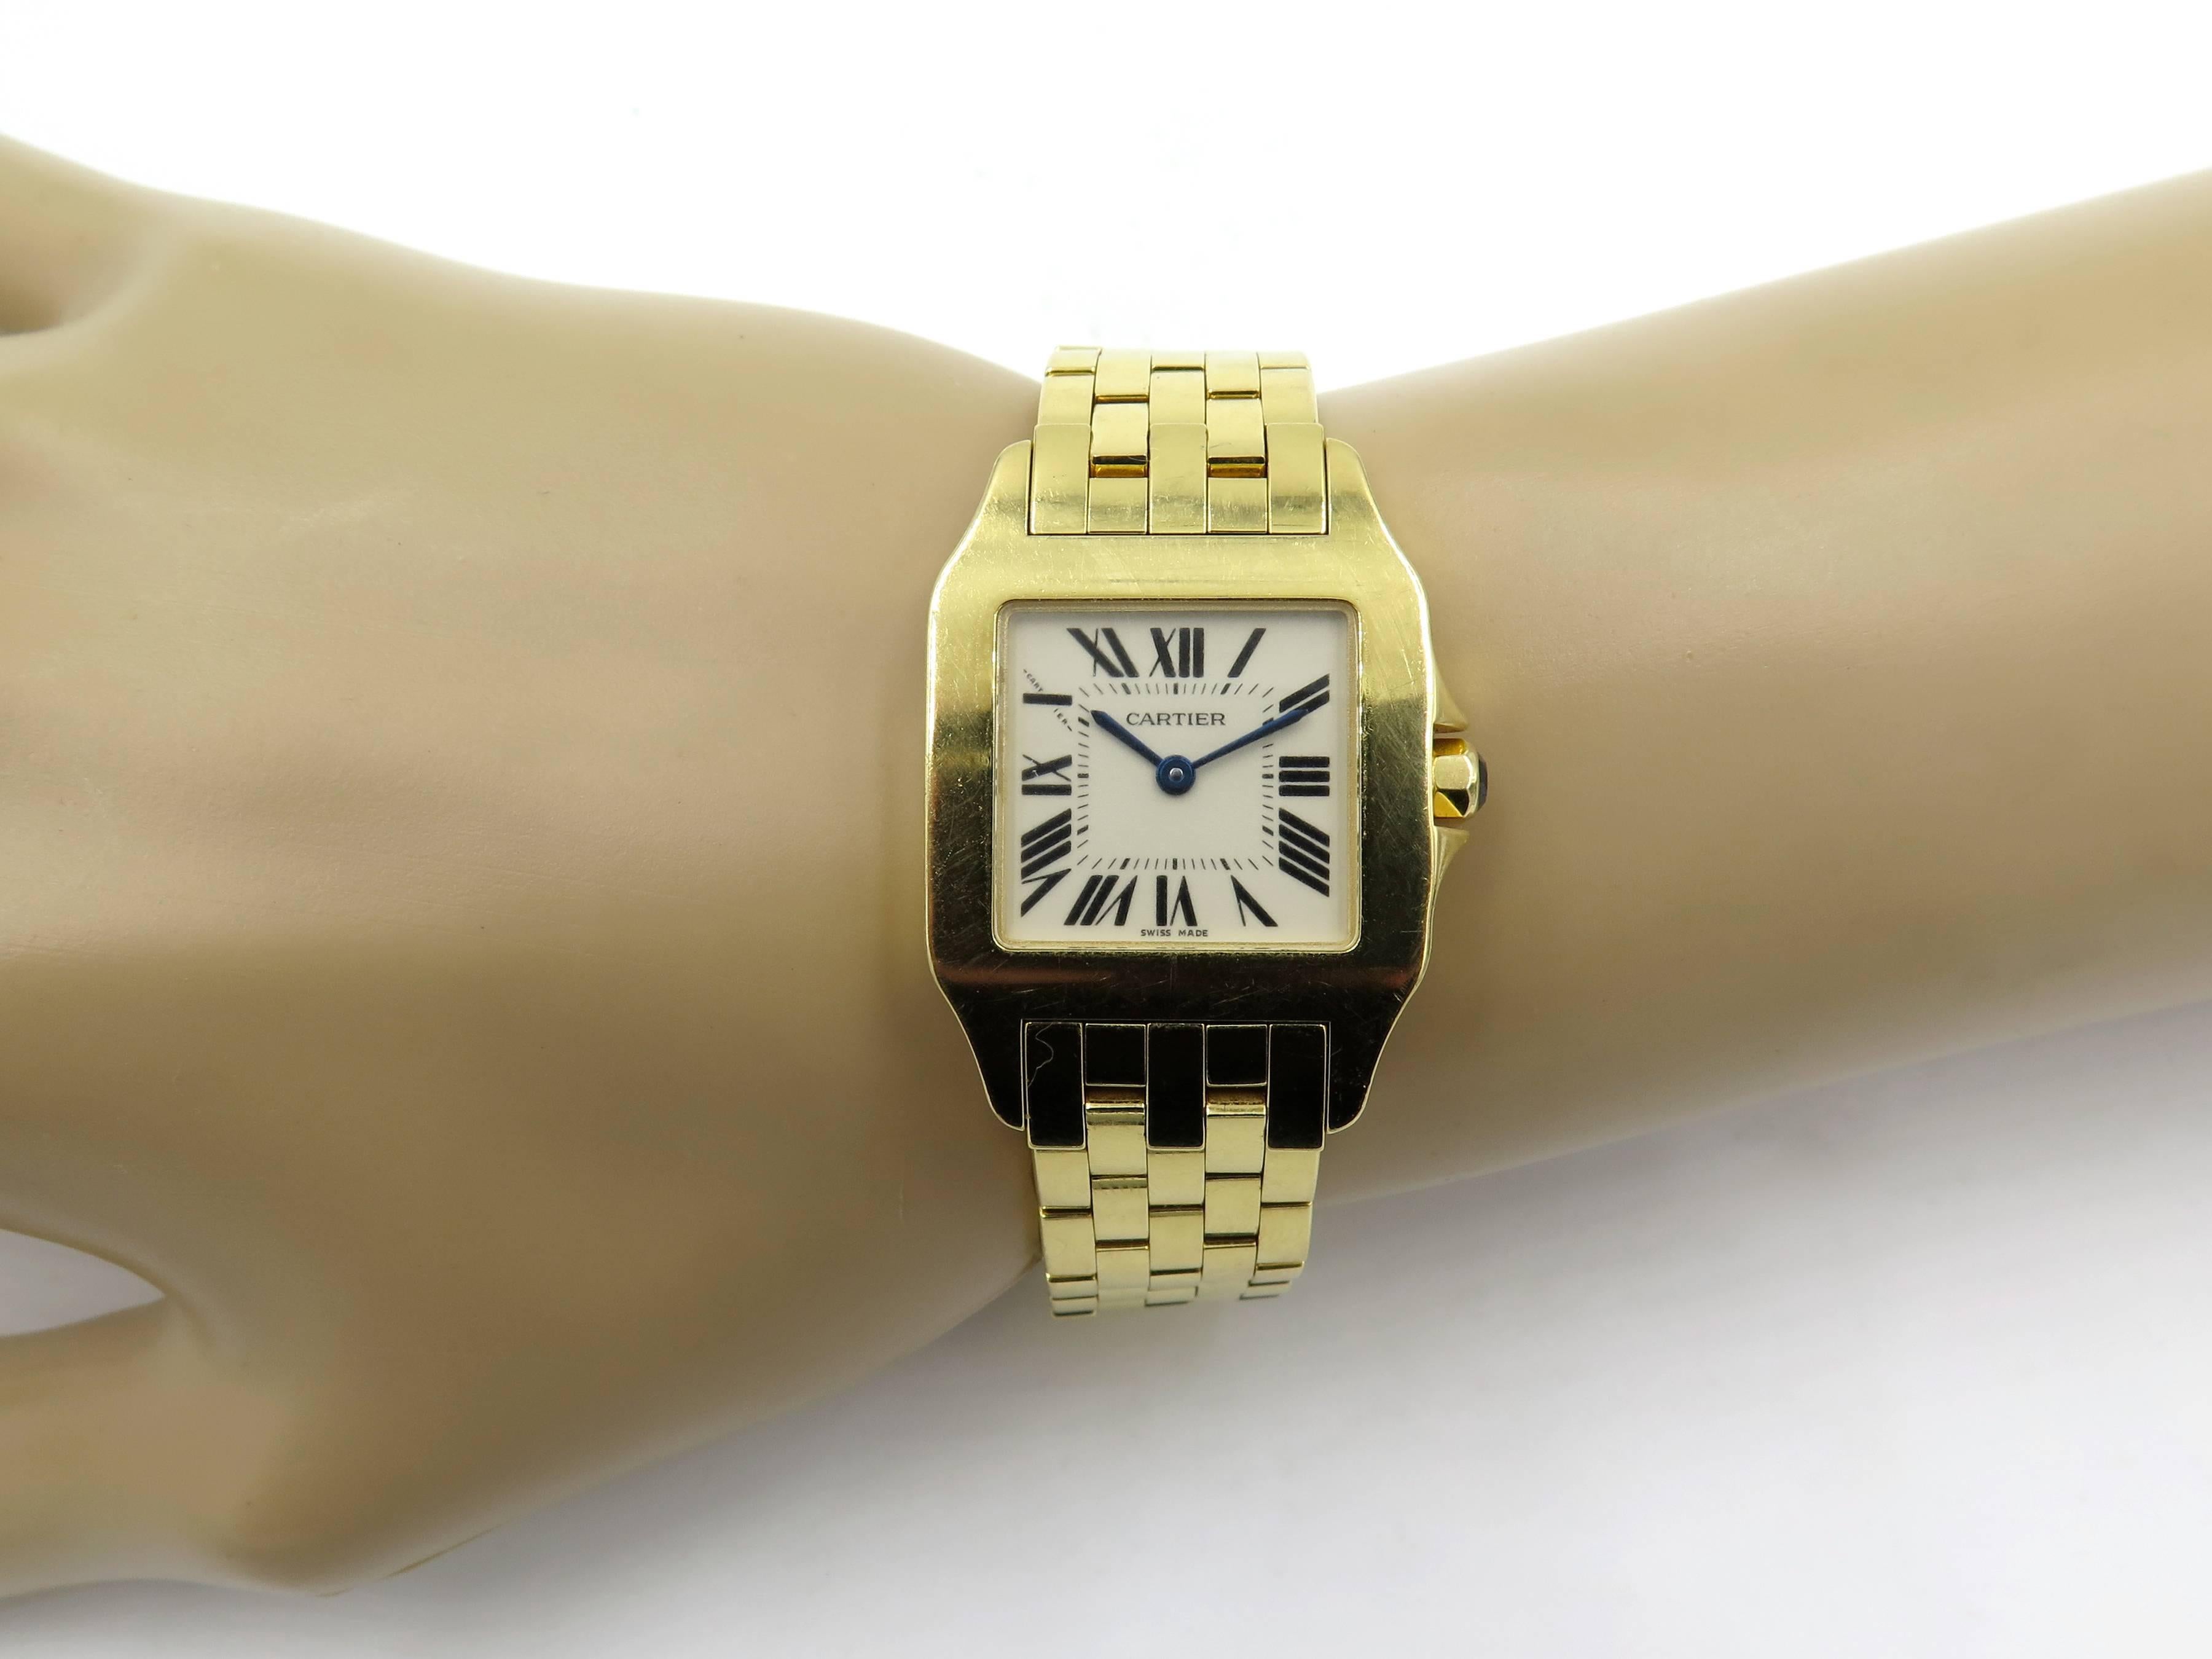 An 18 karat yellow gold Santos Demoiselle watch. Cartier. Model number 2702.  Midsize. 26mm. Of quartz movement, the cream dial with black Roman numerals and blued steel hands, secret signature at 10 o’clock, joined by a polished gold brick link